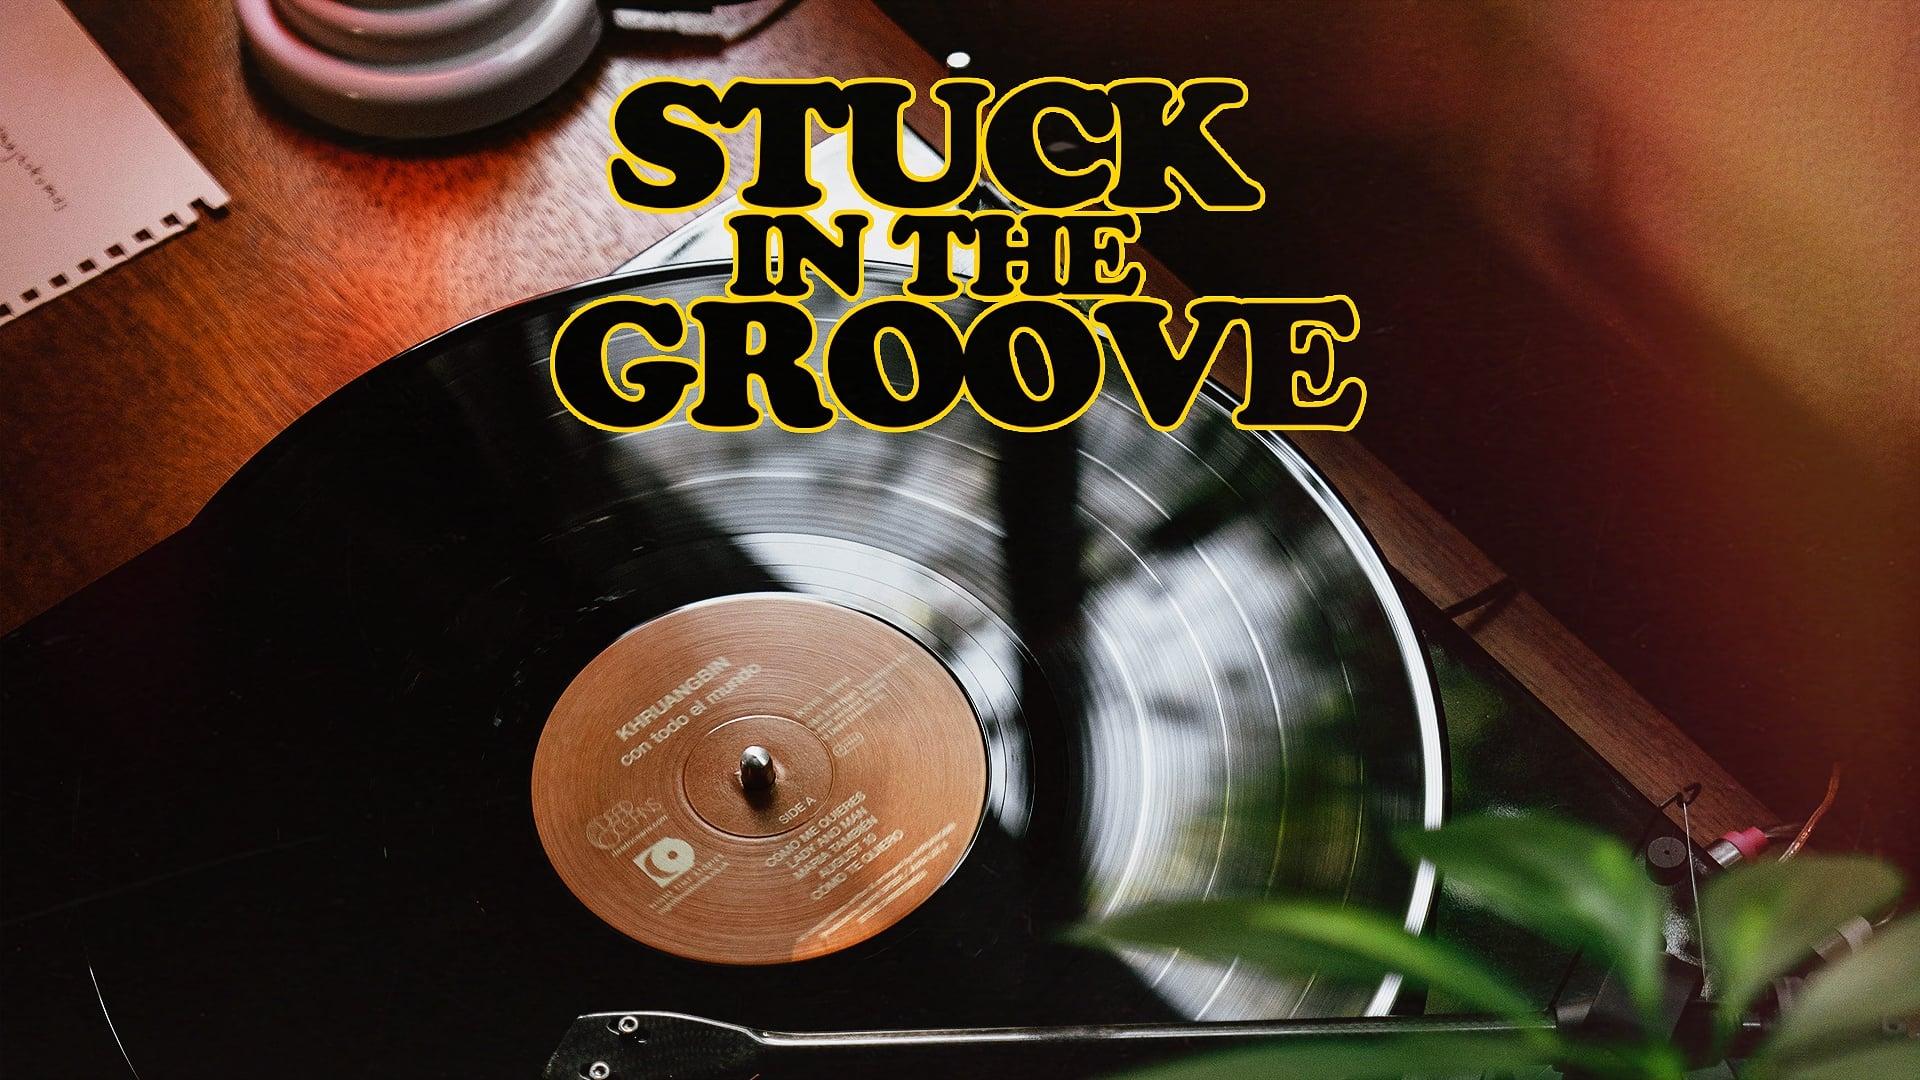 Stuck in the Groove backdrop